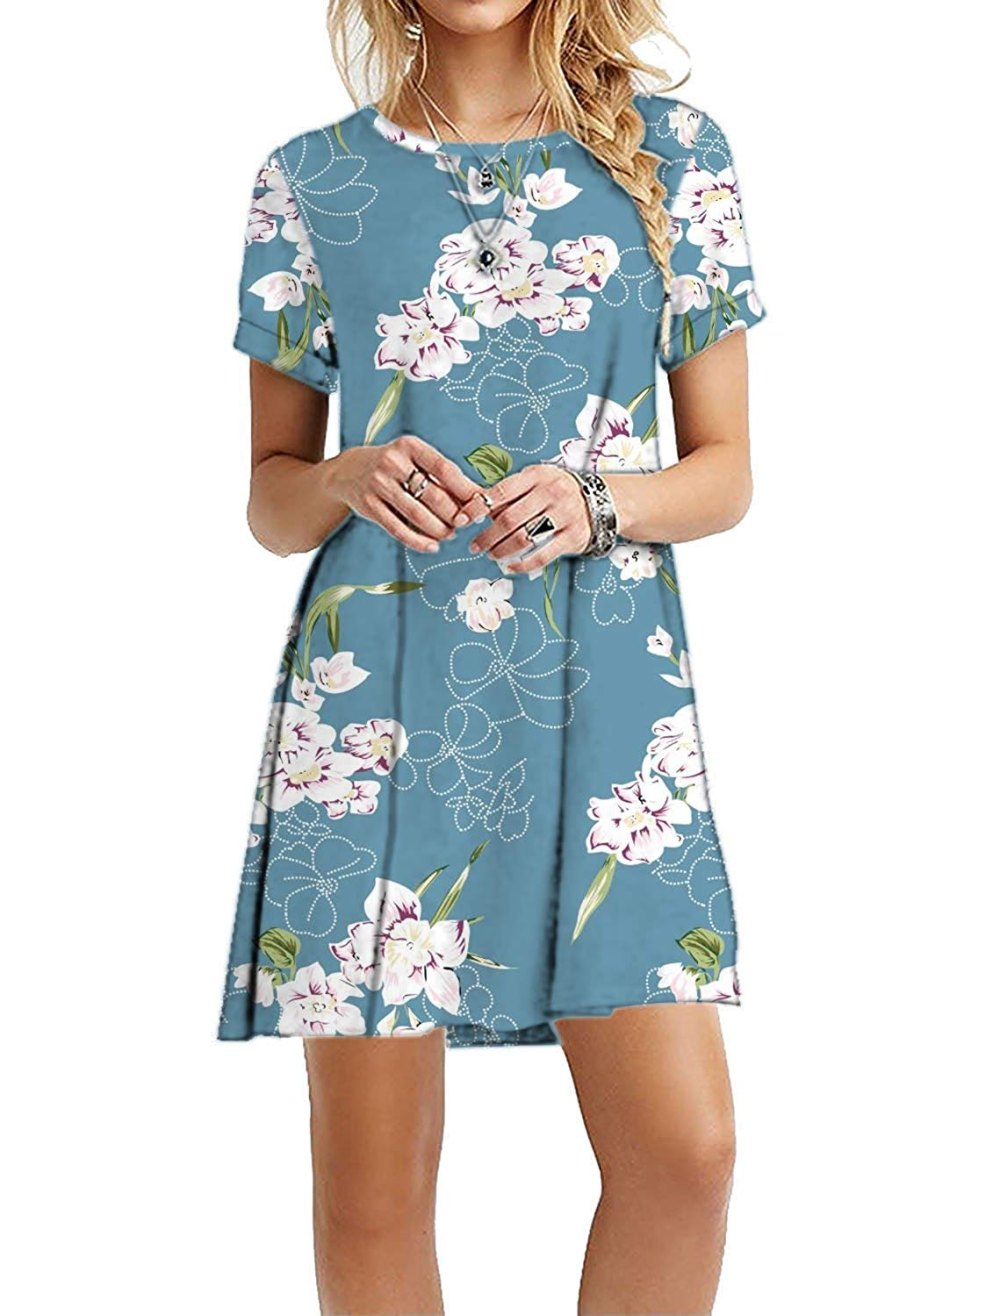 Amazon Shoppers Are Obsessed With This Comfy T-Shirt Dress | Us Weekly